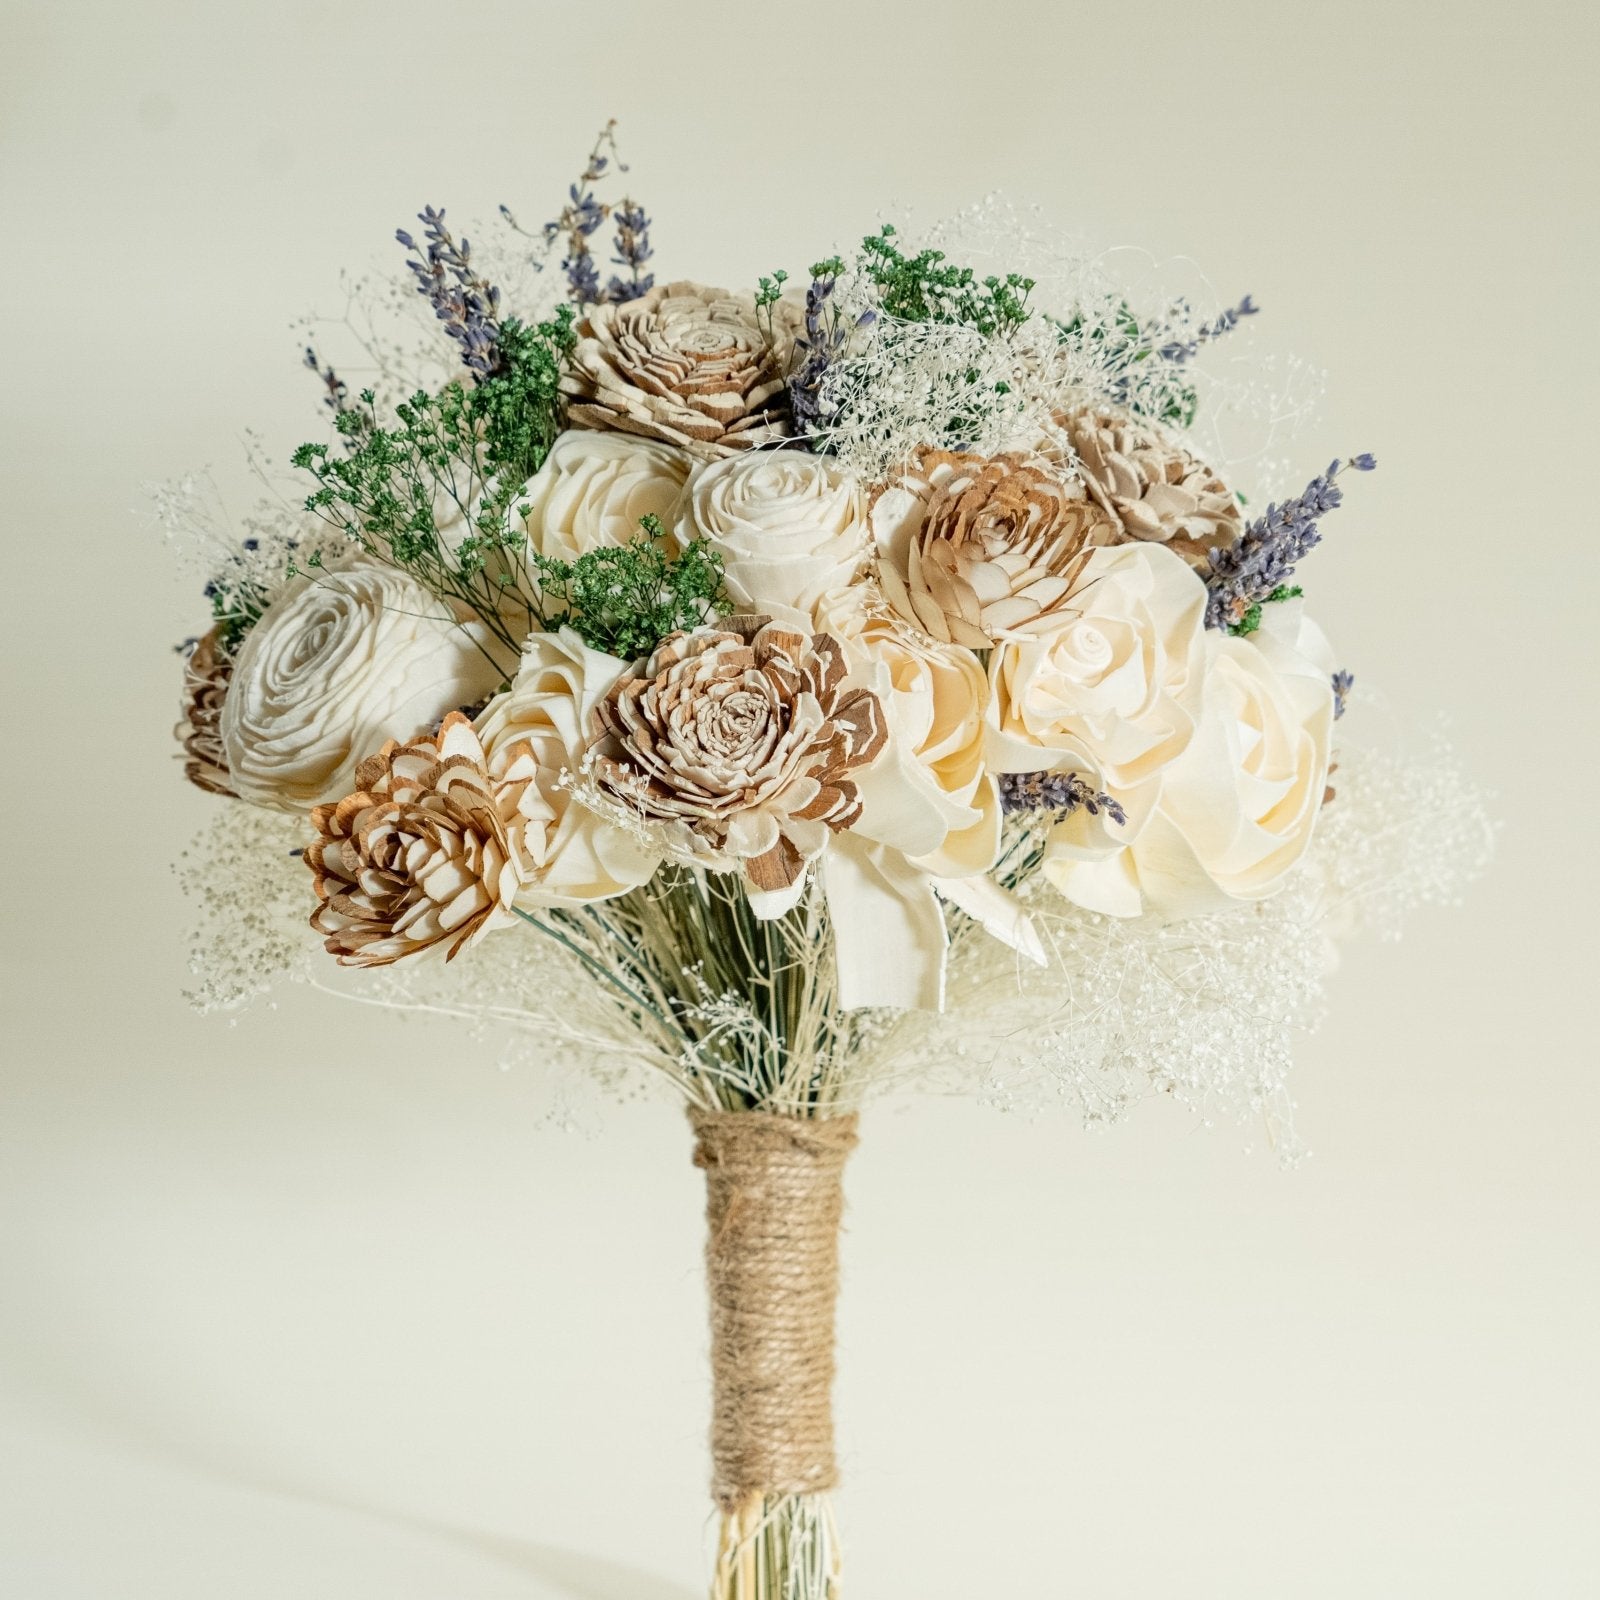 Sola Wood Flowers Bouquet Review: Wedding Wednesday